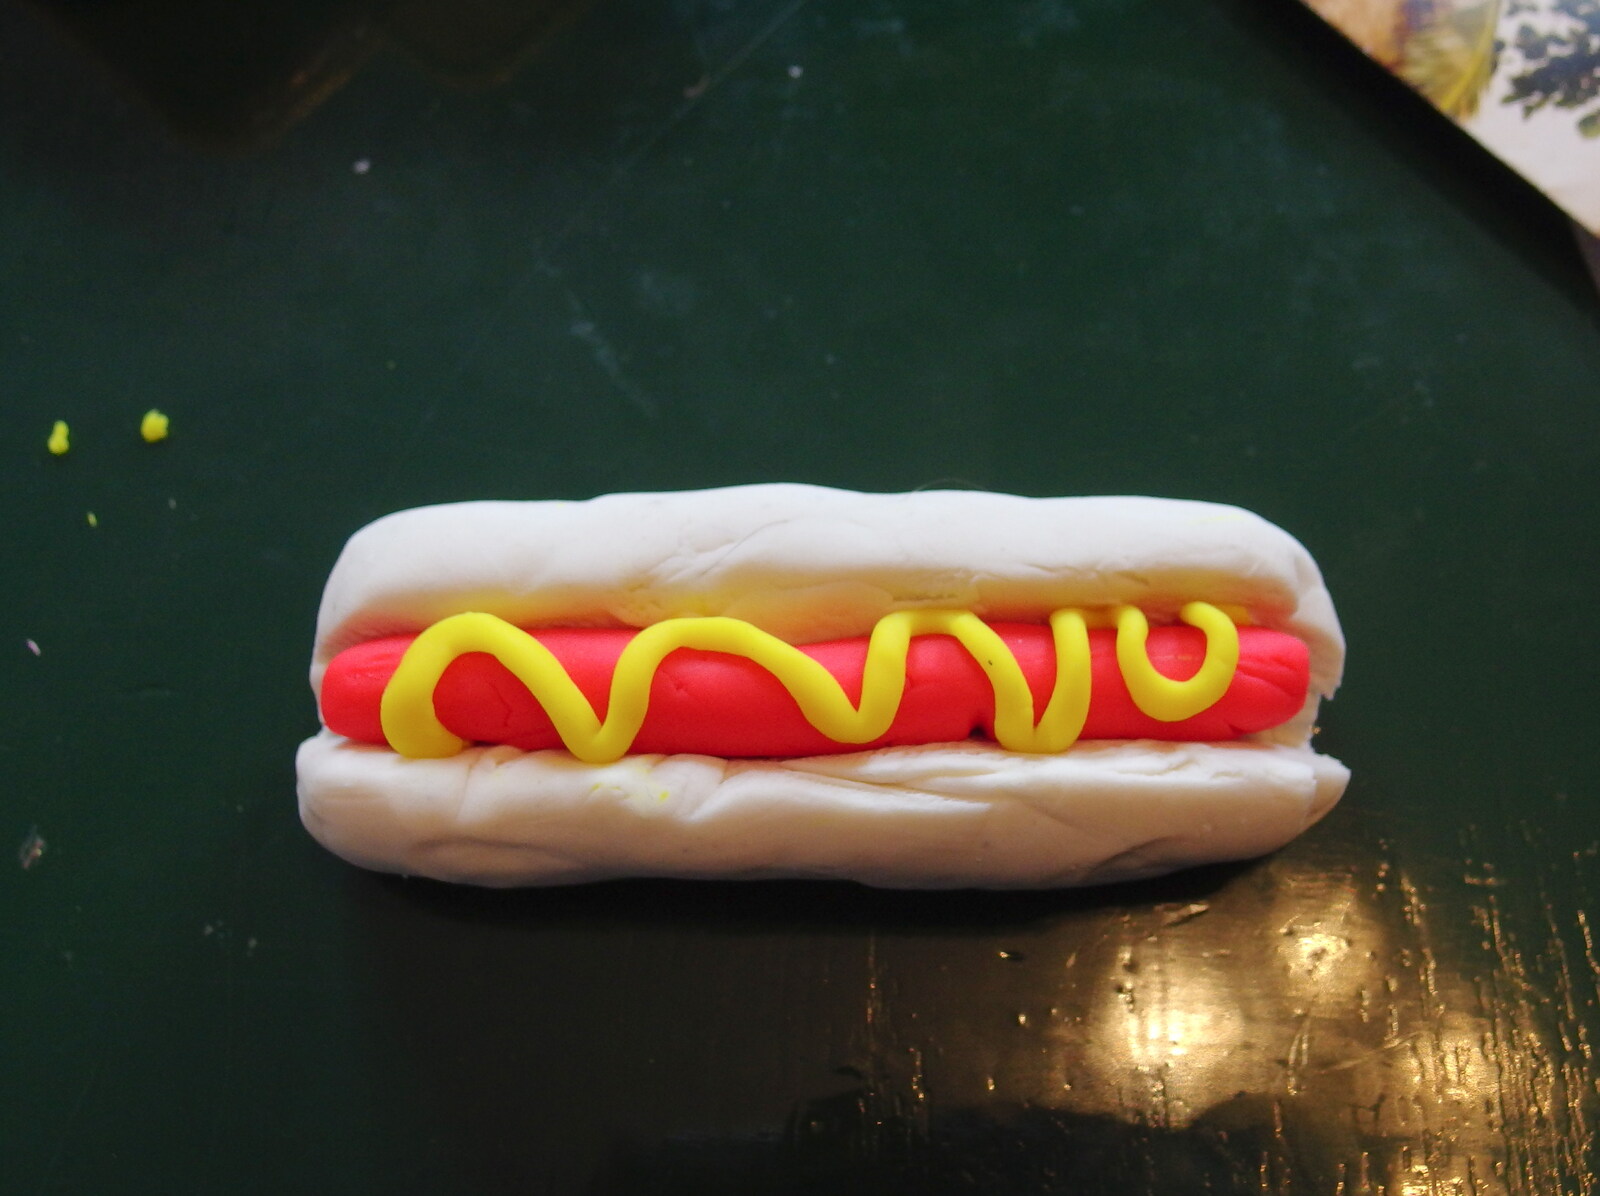 Nosher makes a hotdog out of Play-Doh from A Trip to Monkstown Farm and Blackrock, County Dublin, Ireland - 2nd January 2014